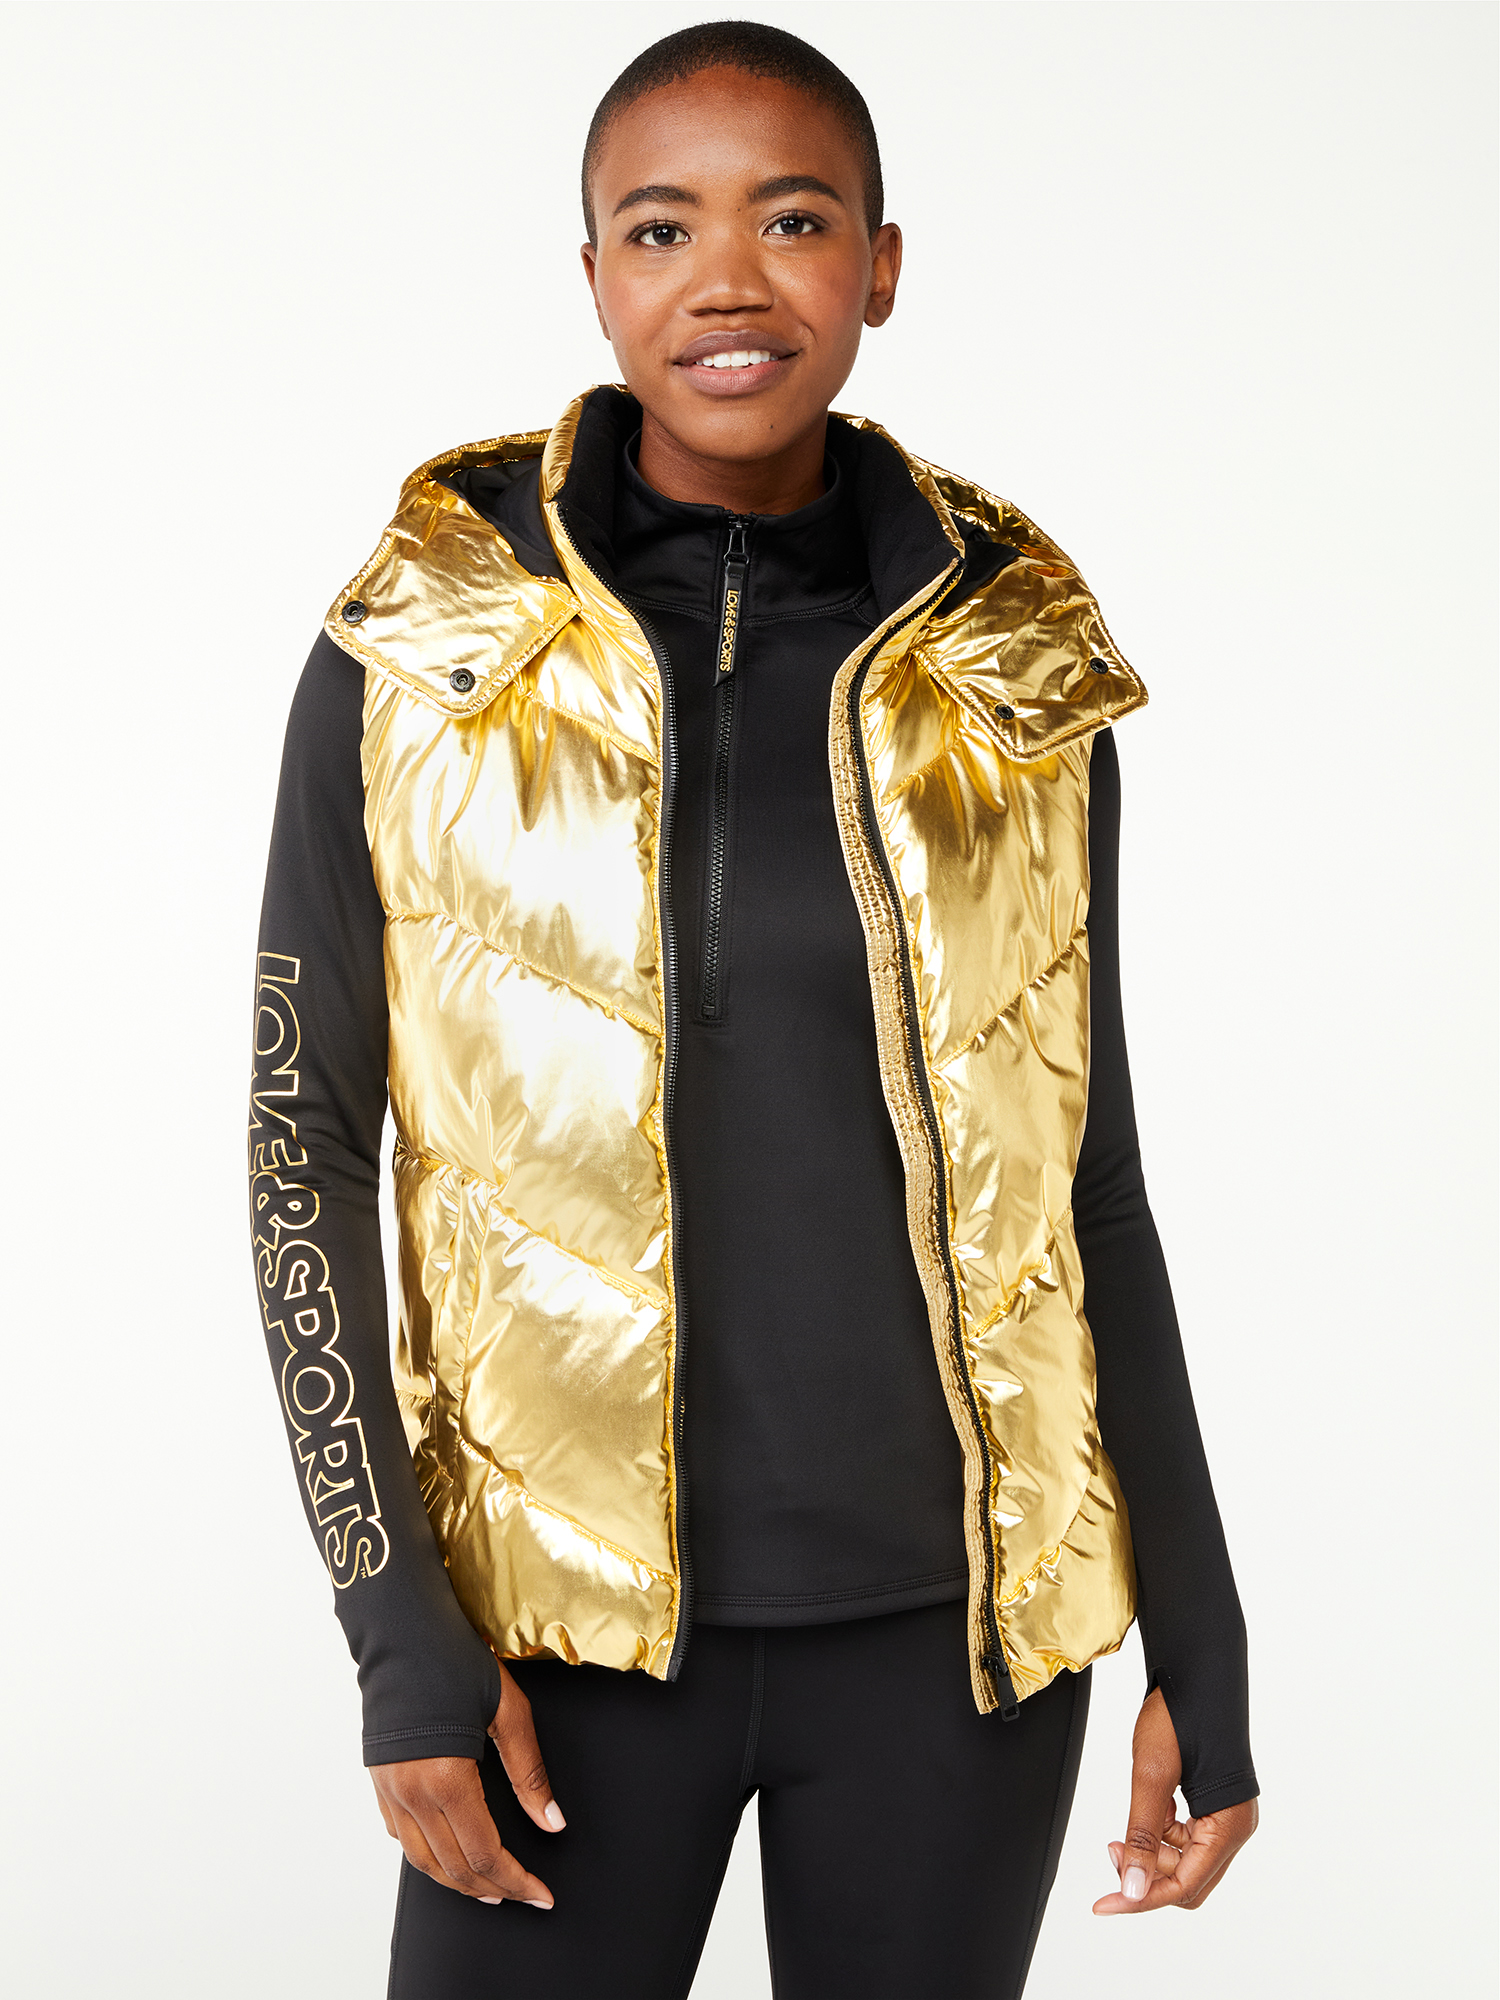 Love & Sports Women's Gold Foil Puffer Vest with Hood - image 1 of 7